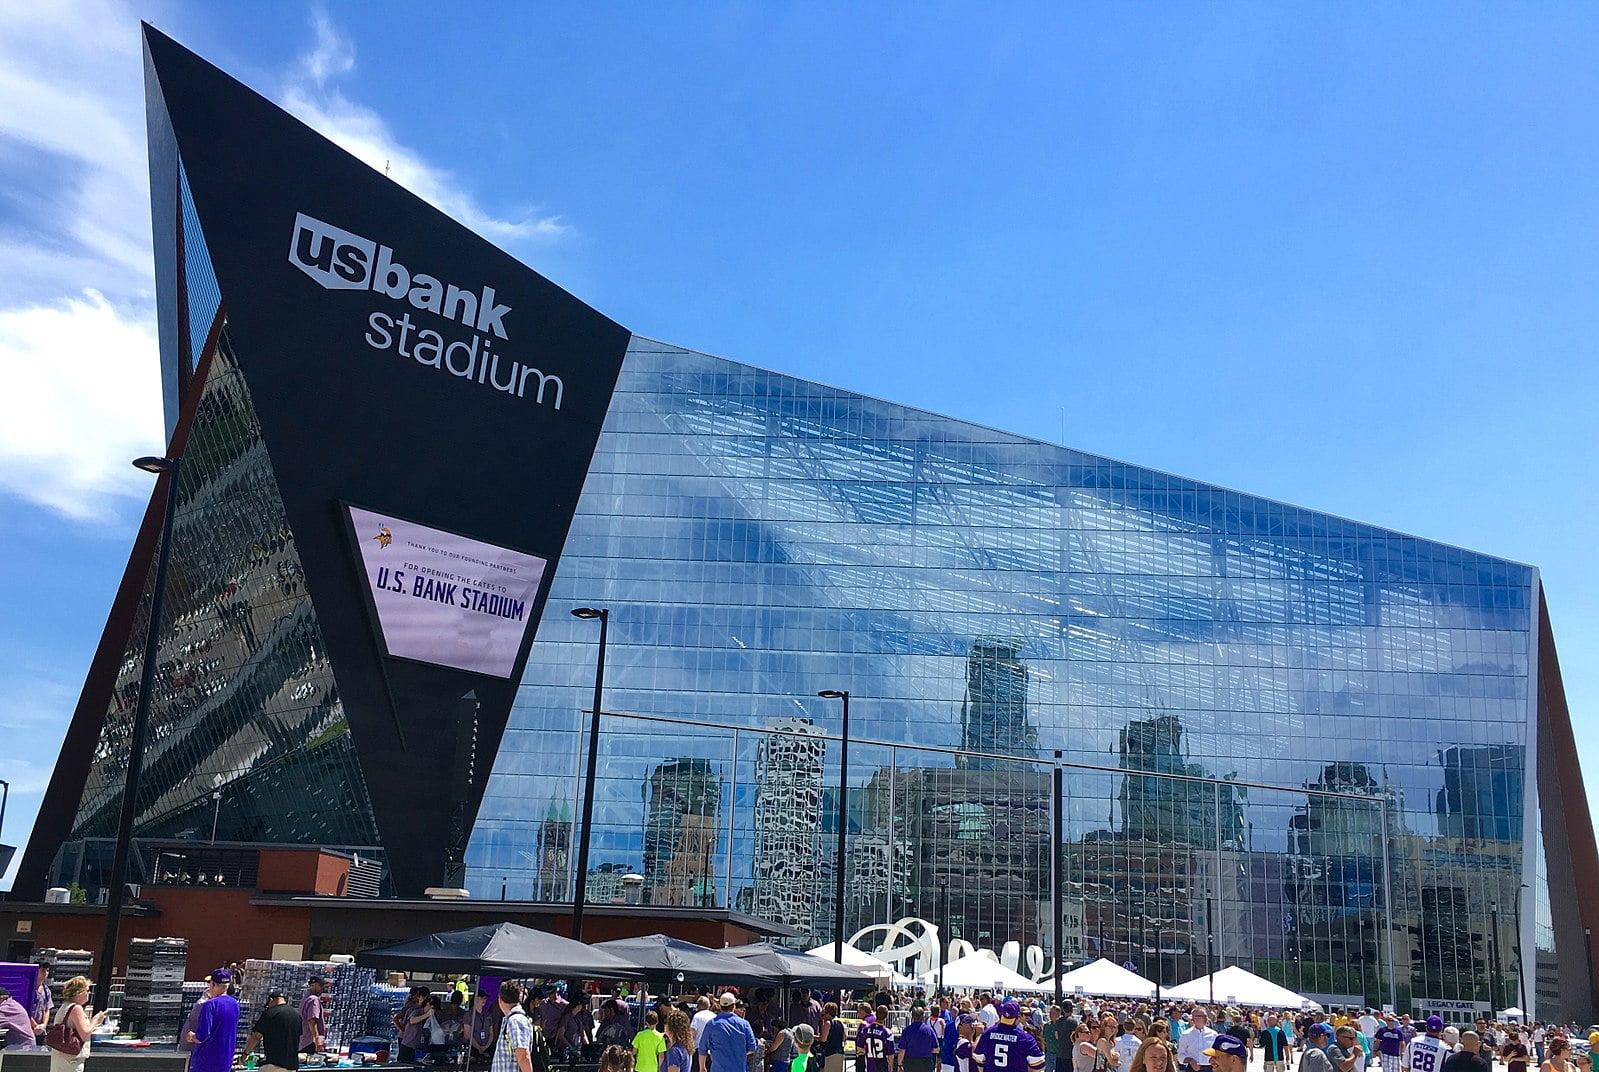 U.S. Bank Stadium: What you need to know to make it a great day